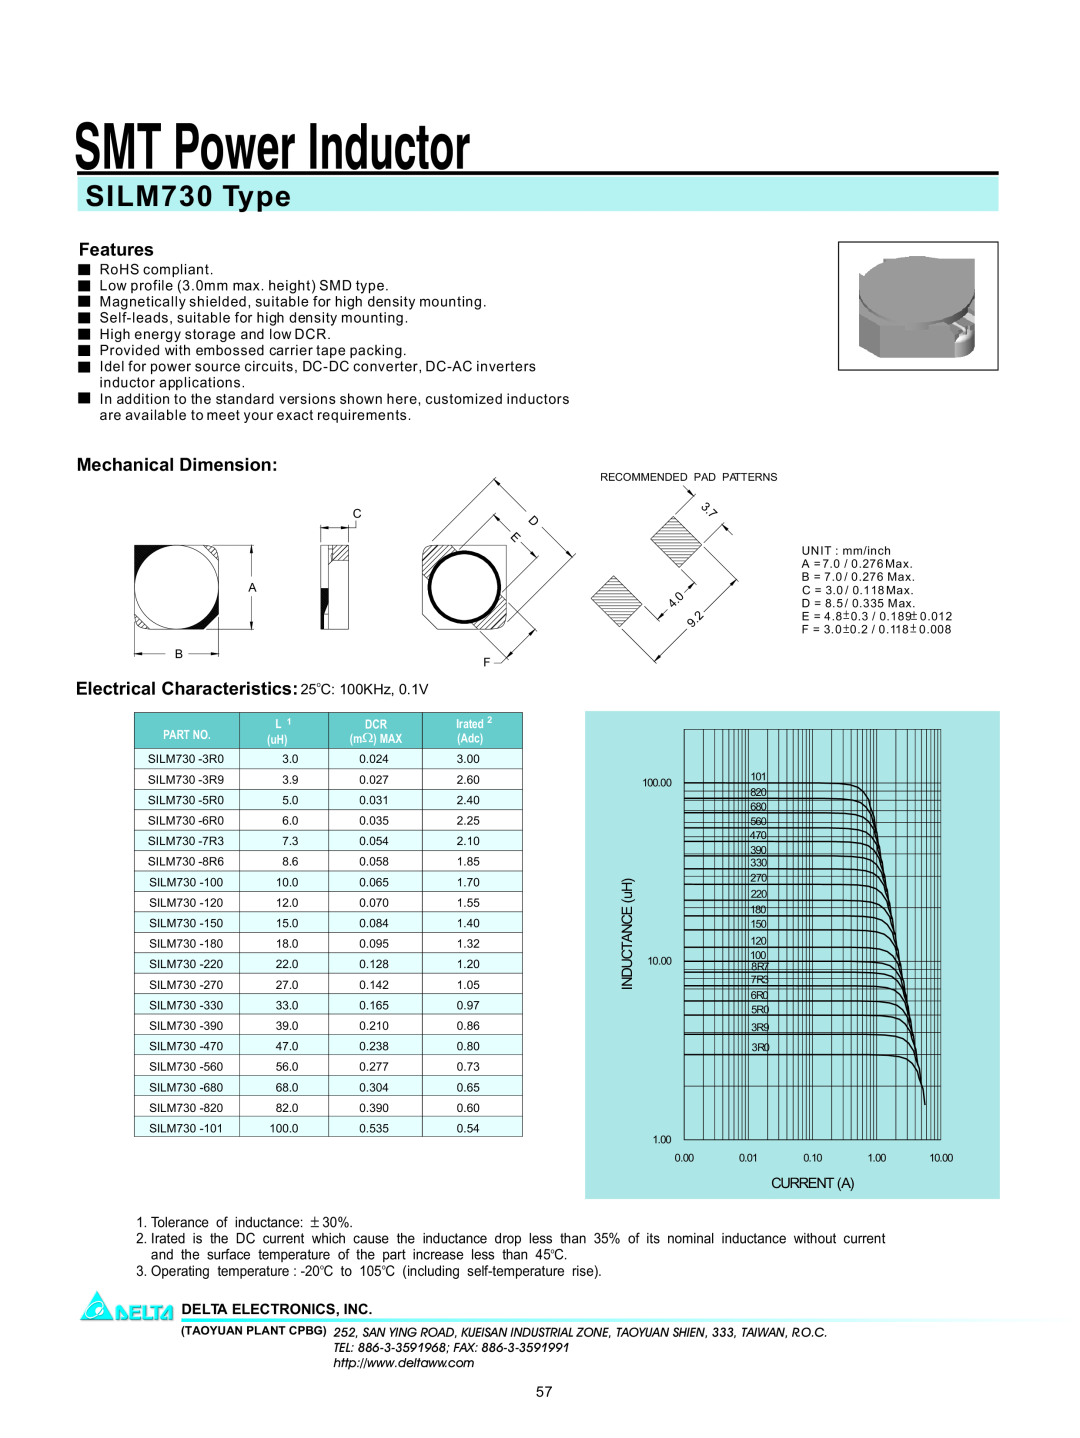 Delta Electronics manual SMT Power Inductor, SILM730 Type, Features, Mechanical Dimension, Delta Electronics, Inc 